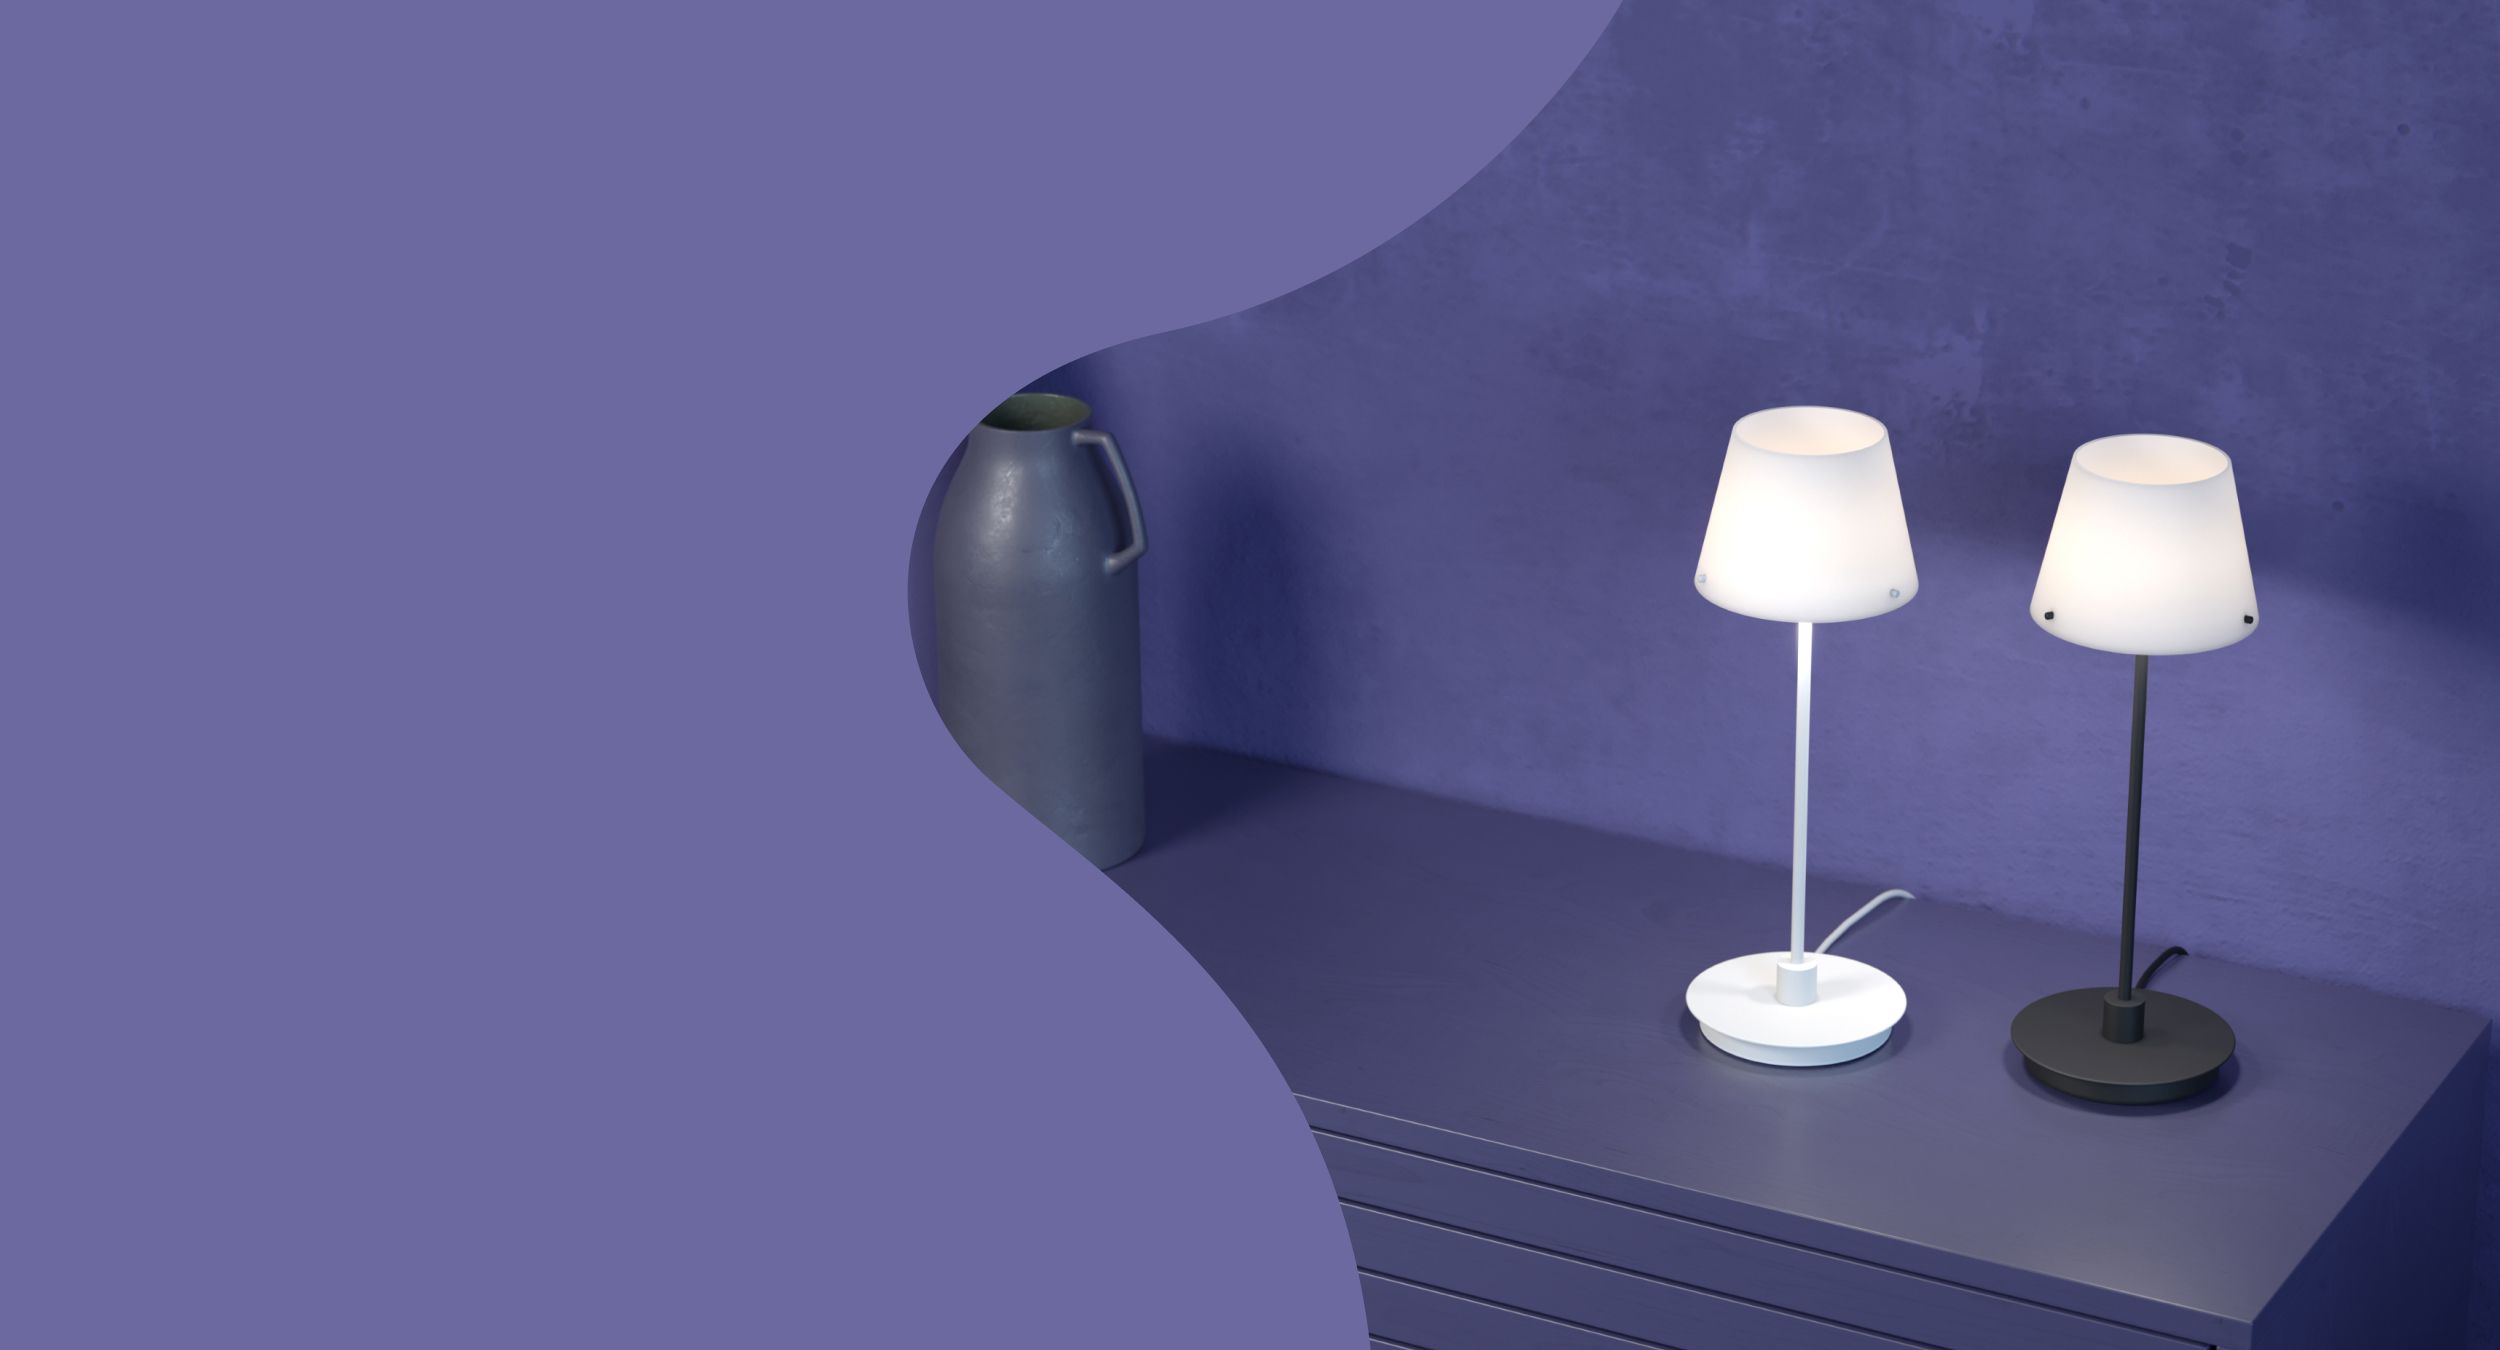 Two table lamps on a side table in a purple room